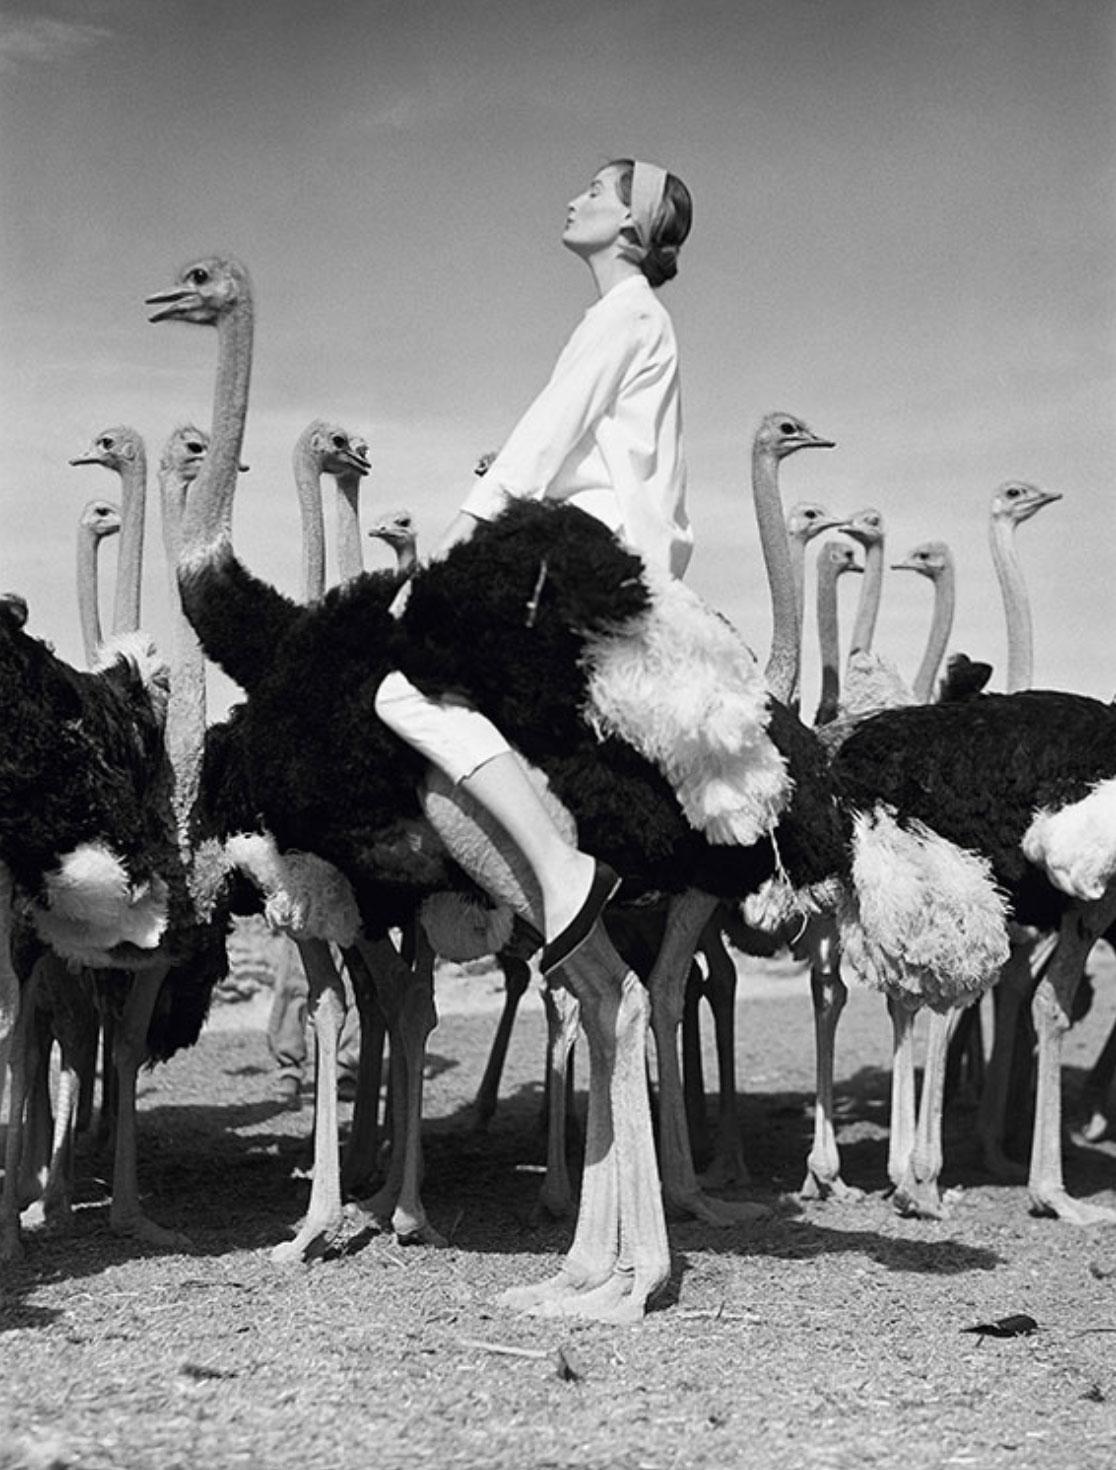 Norman Parkinson Black and White Photograph - Wenda and Ostriches